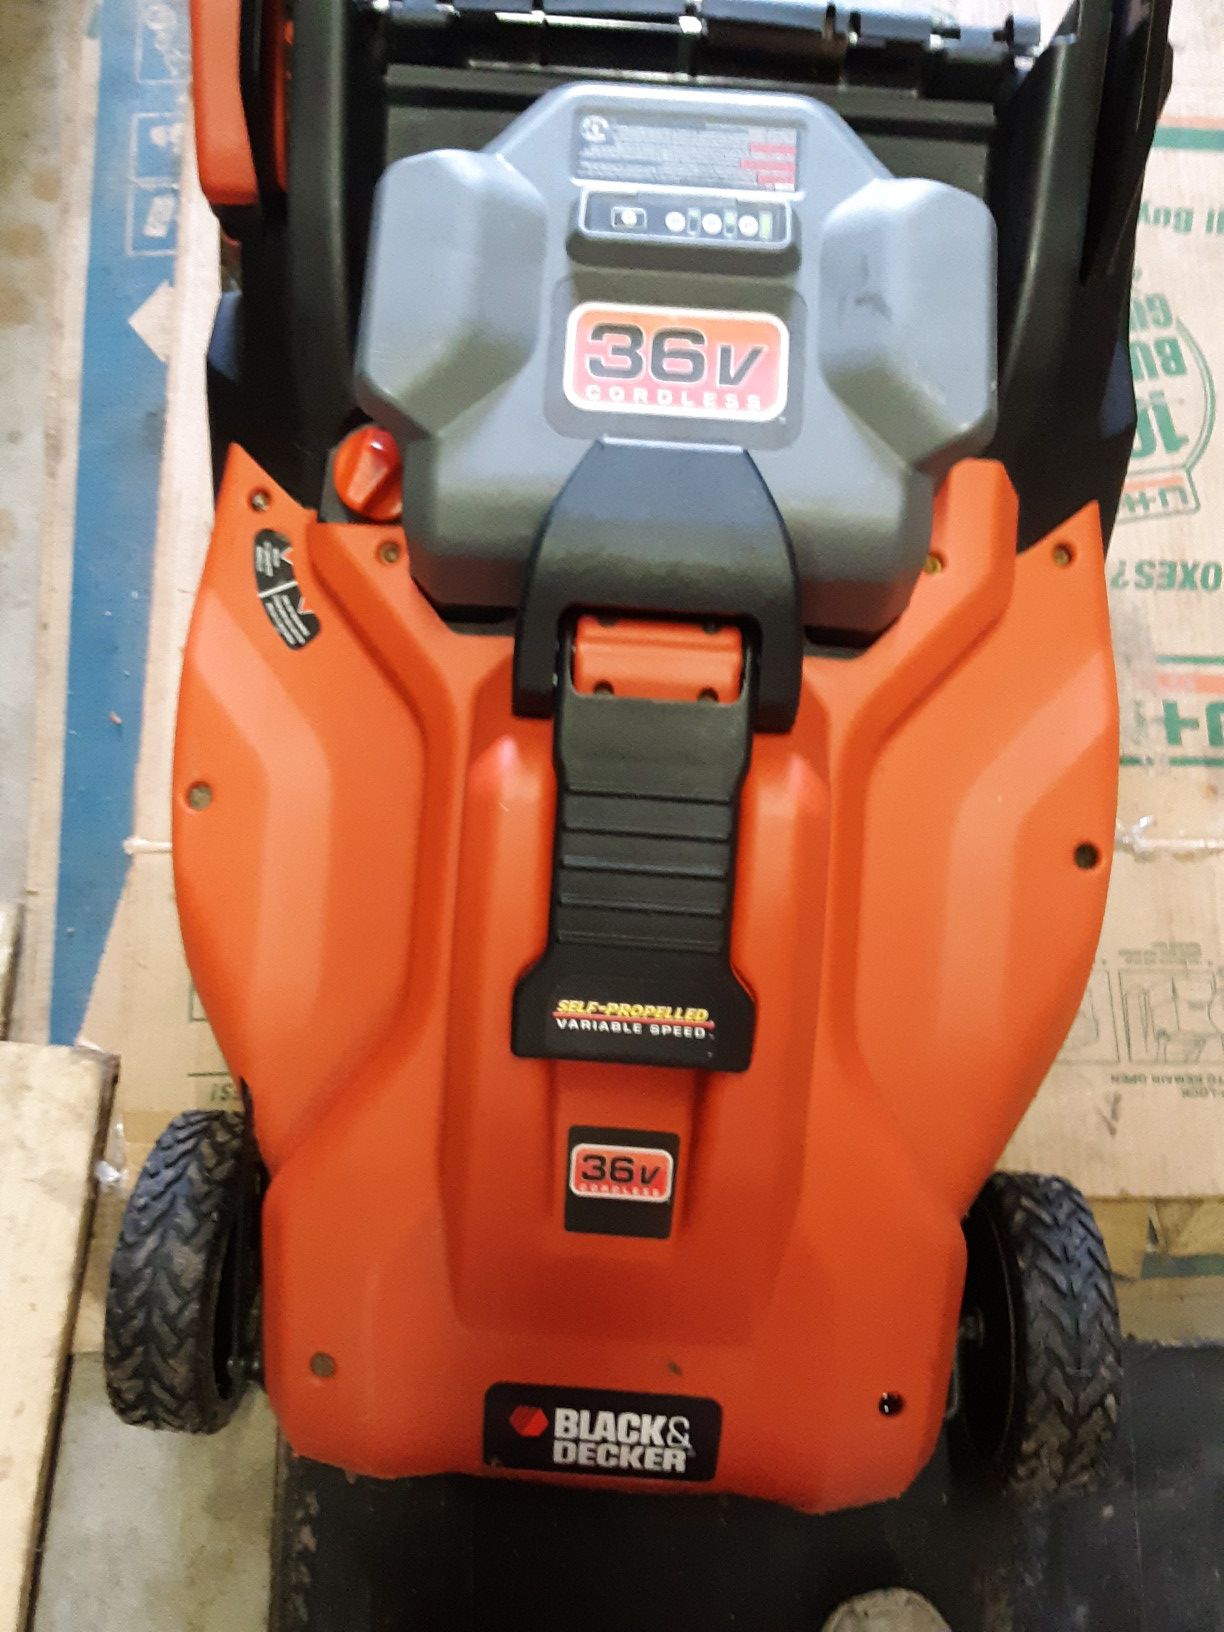 Black & Decker battery operated lawn mower 36 volt for Sale in Gibsonton,  FL - OfferUp